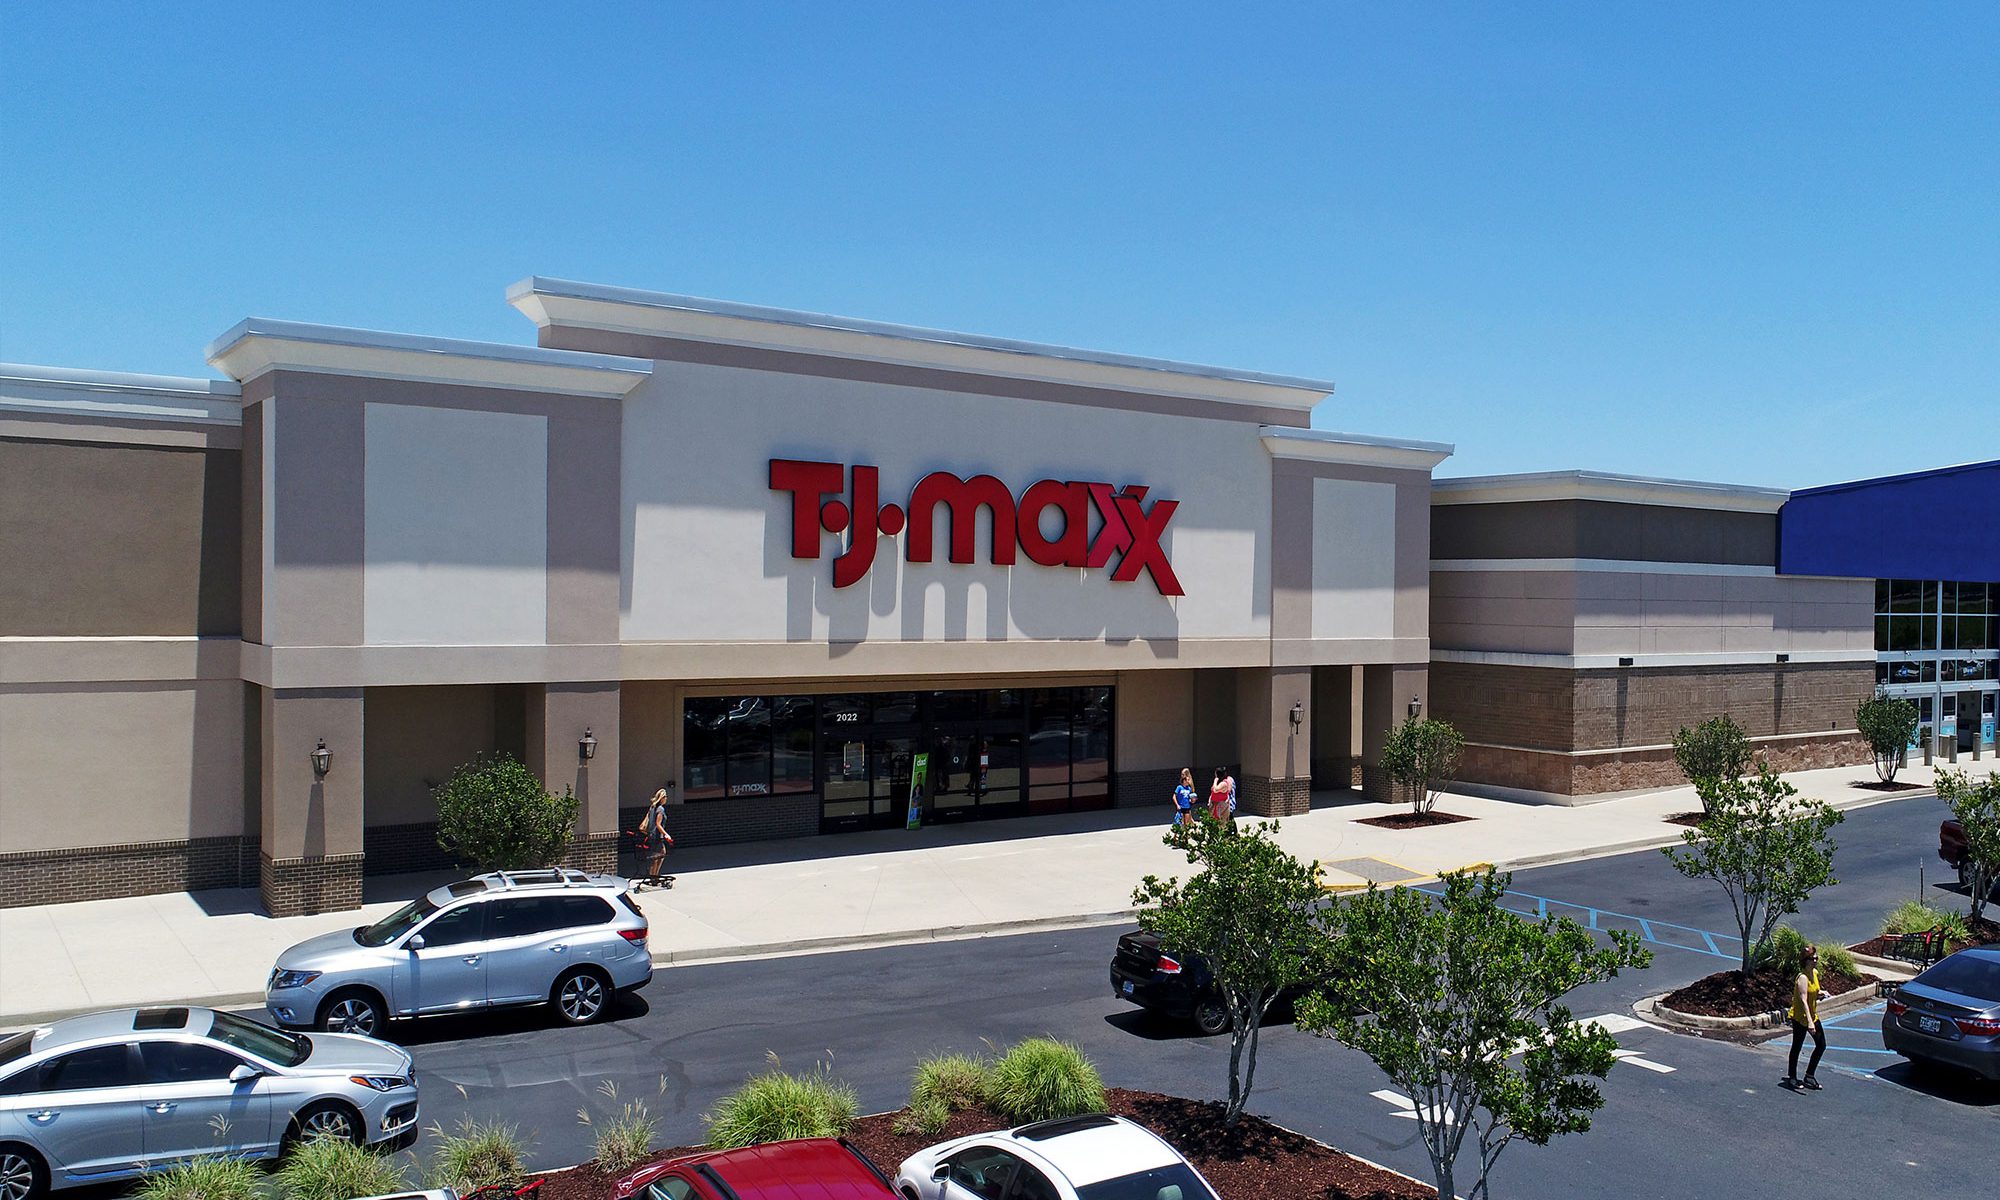 TJ Maxx Dress Code In 2022 (All You Need to Know)